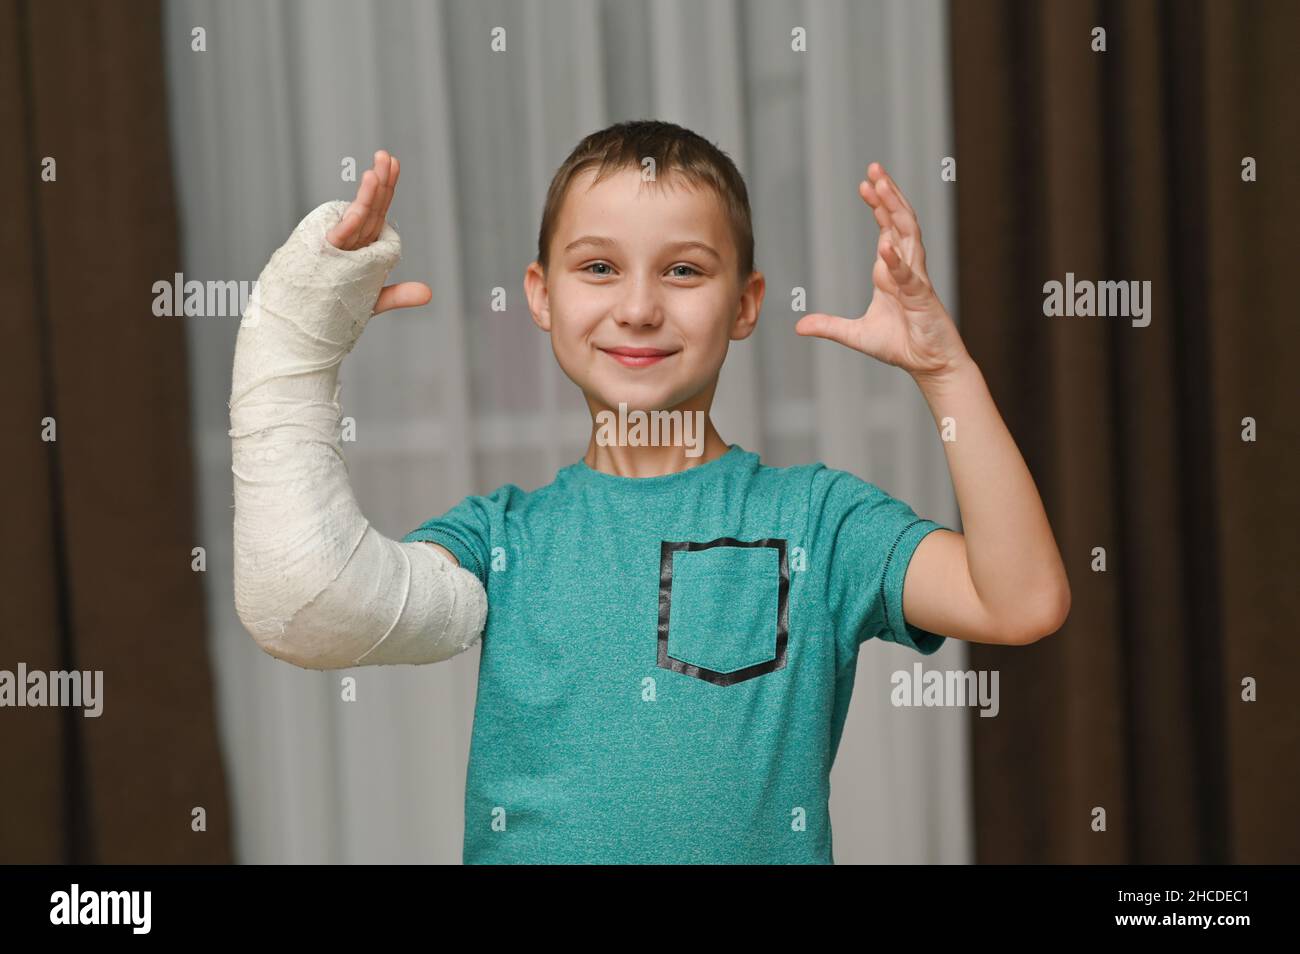 the boy raised two hands up. One arm is broken in a cast. Stock Photo